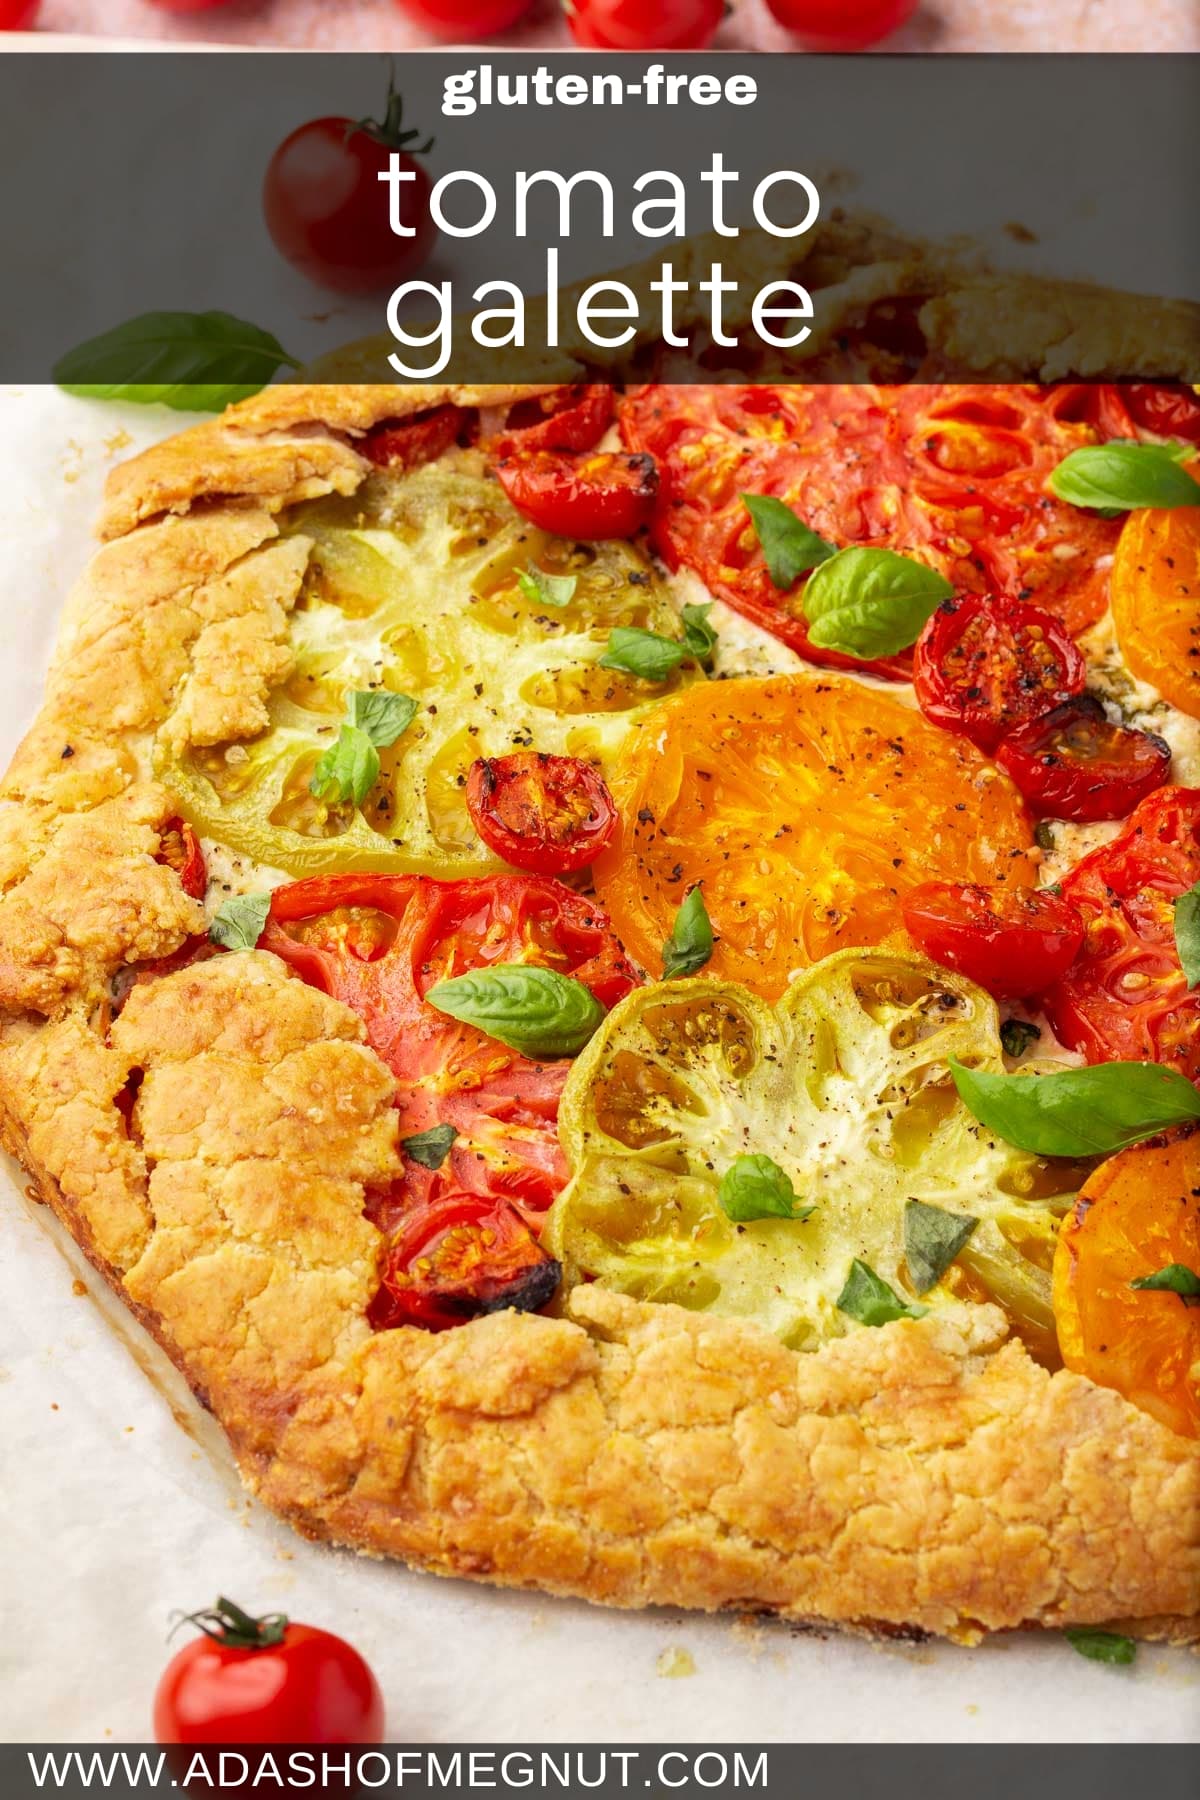 A whole gluten-free tomato tart with basil on top.